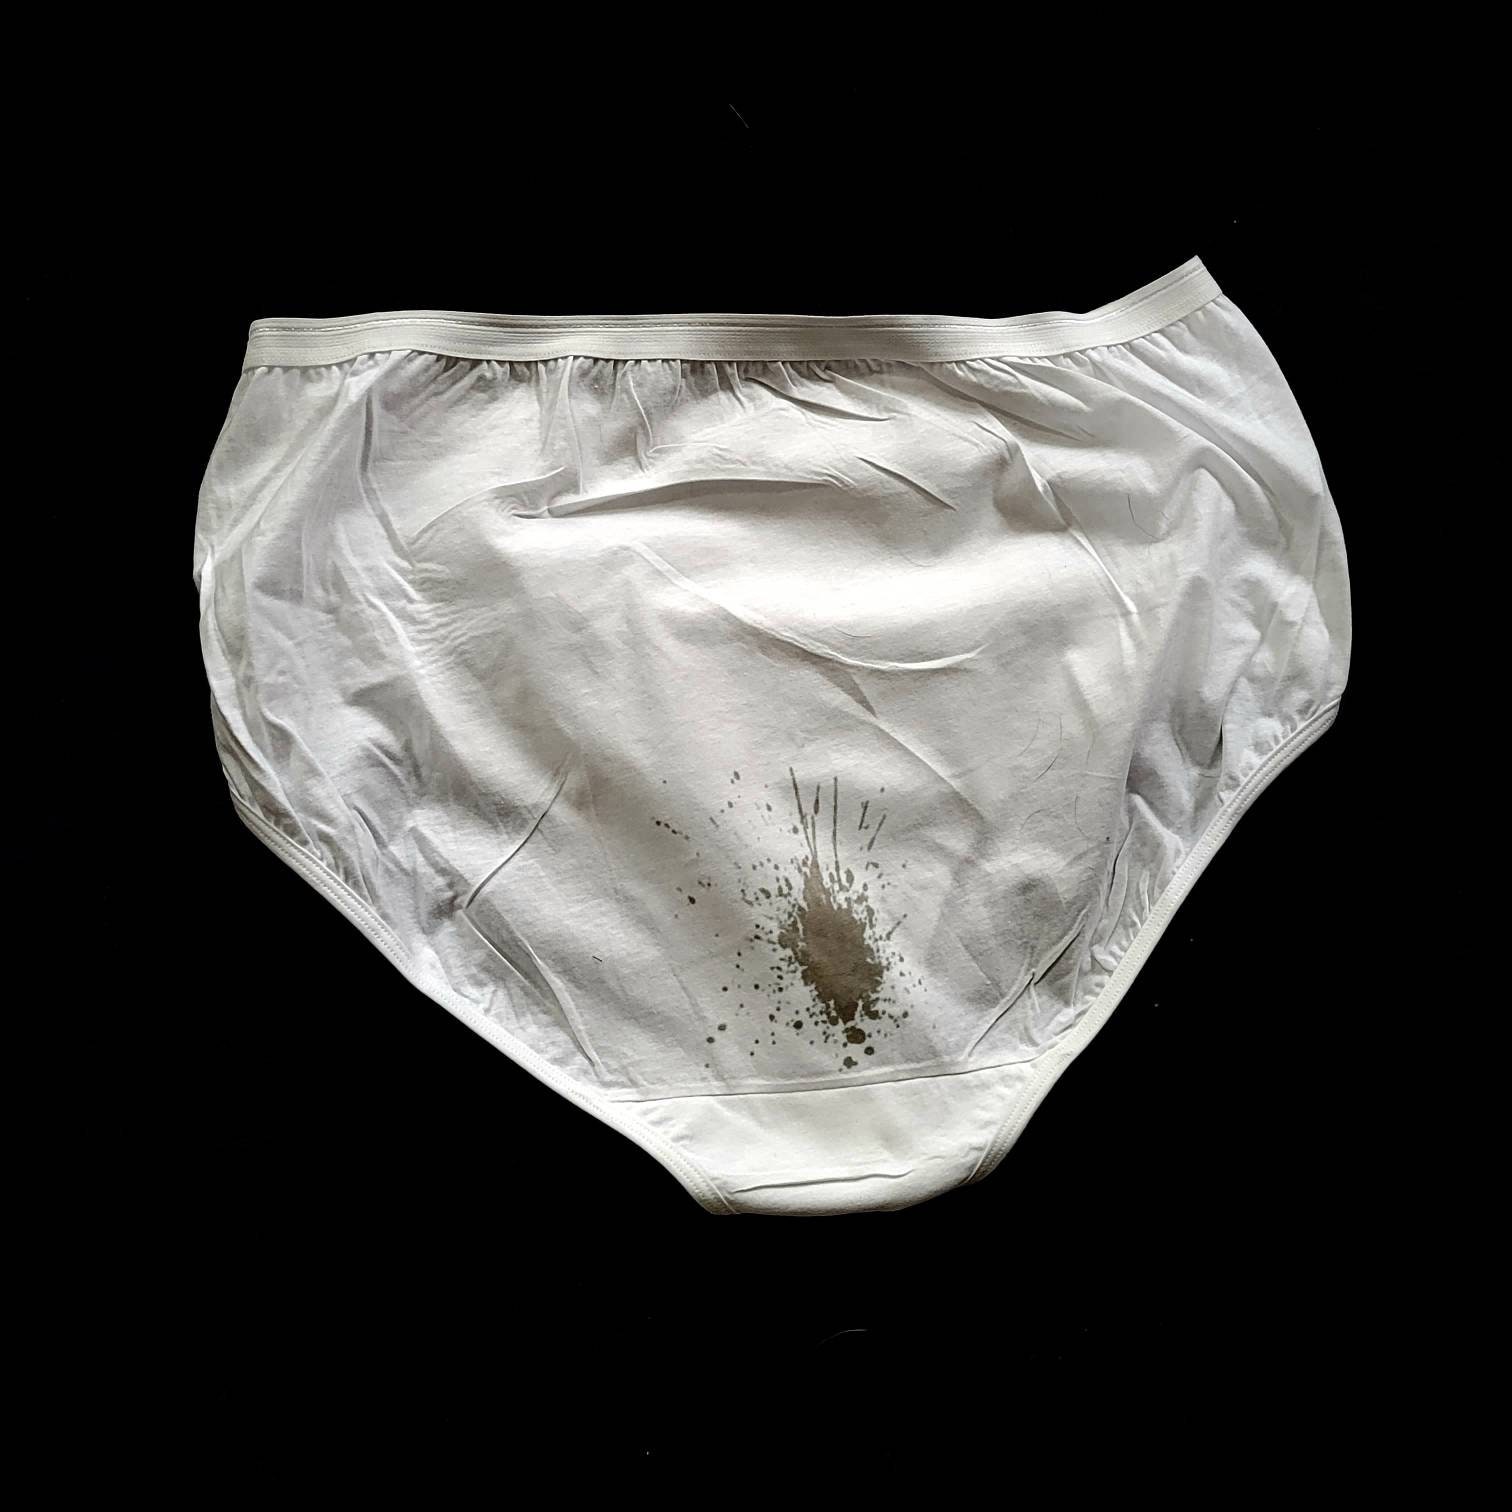 Gag Gift, Shartwear Pre-stained Underwear, Funny Gift for Friend